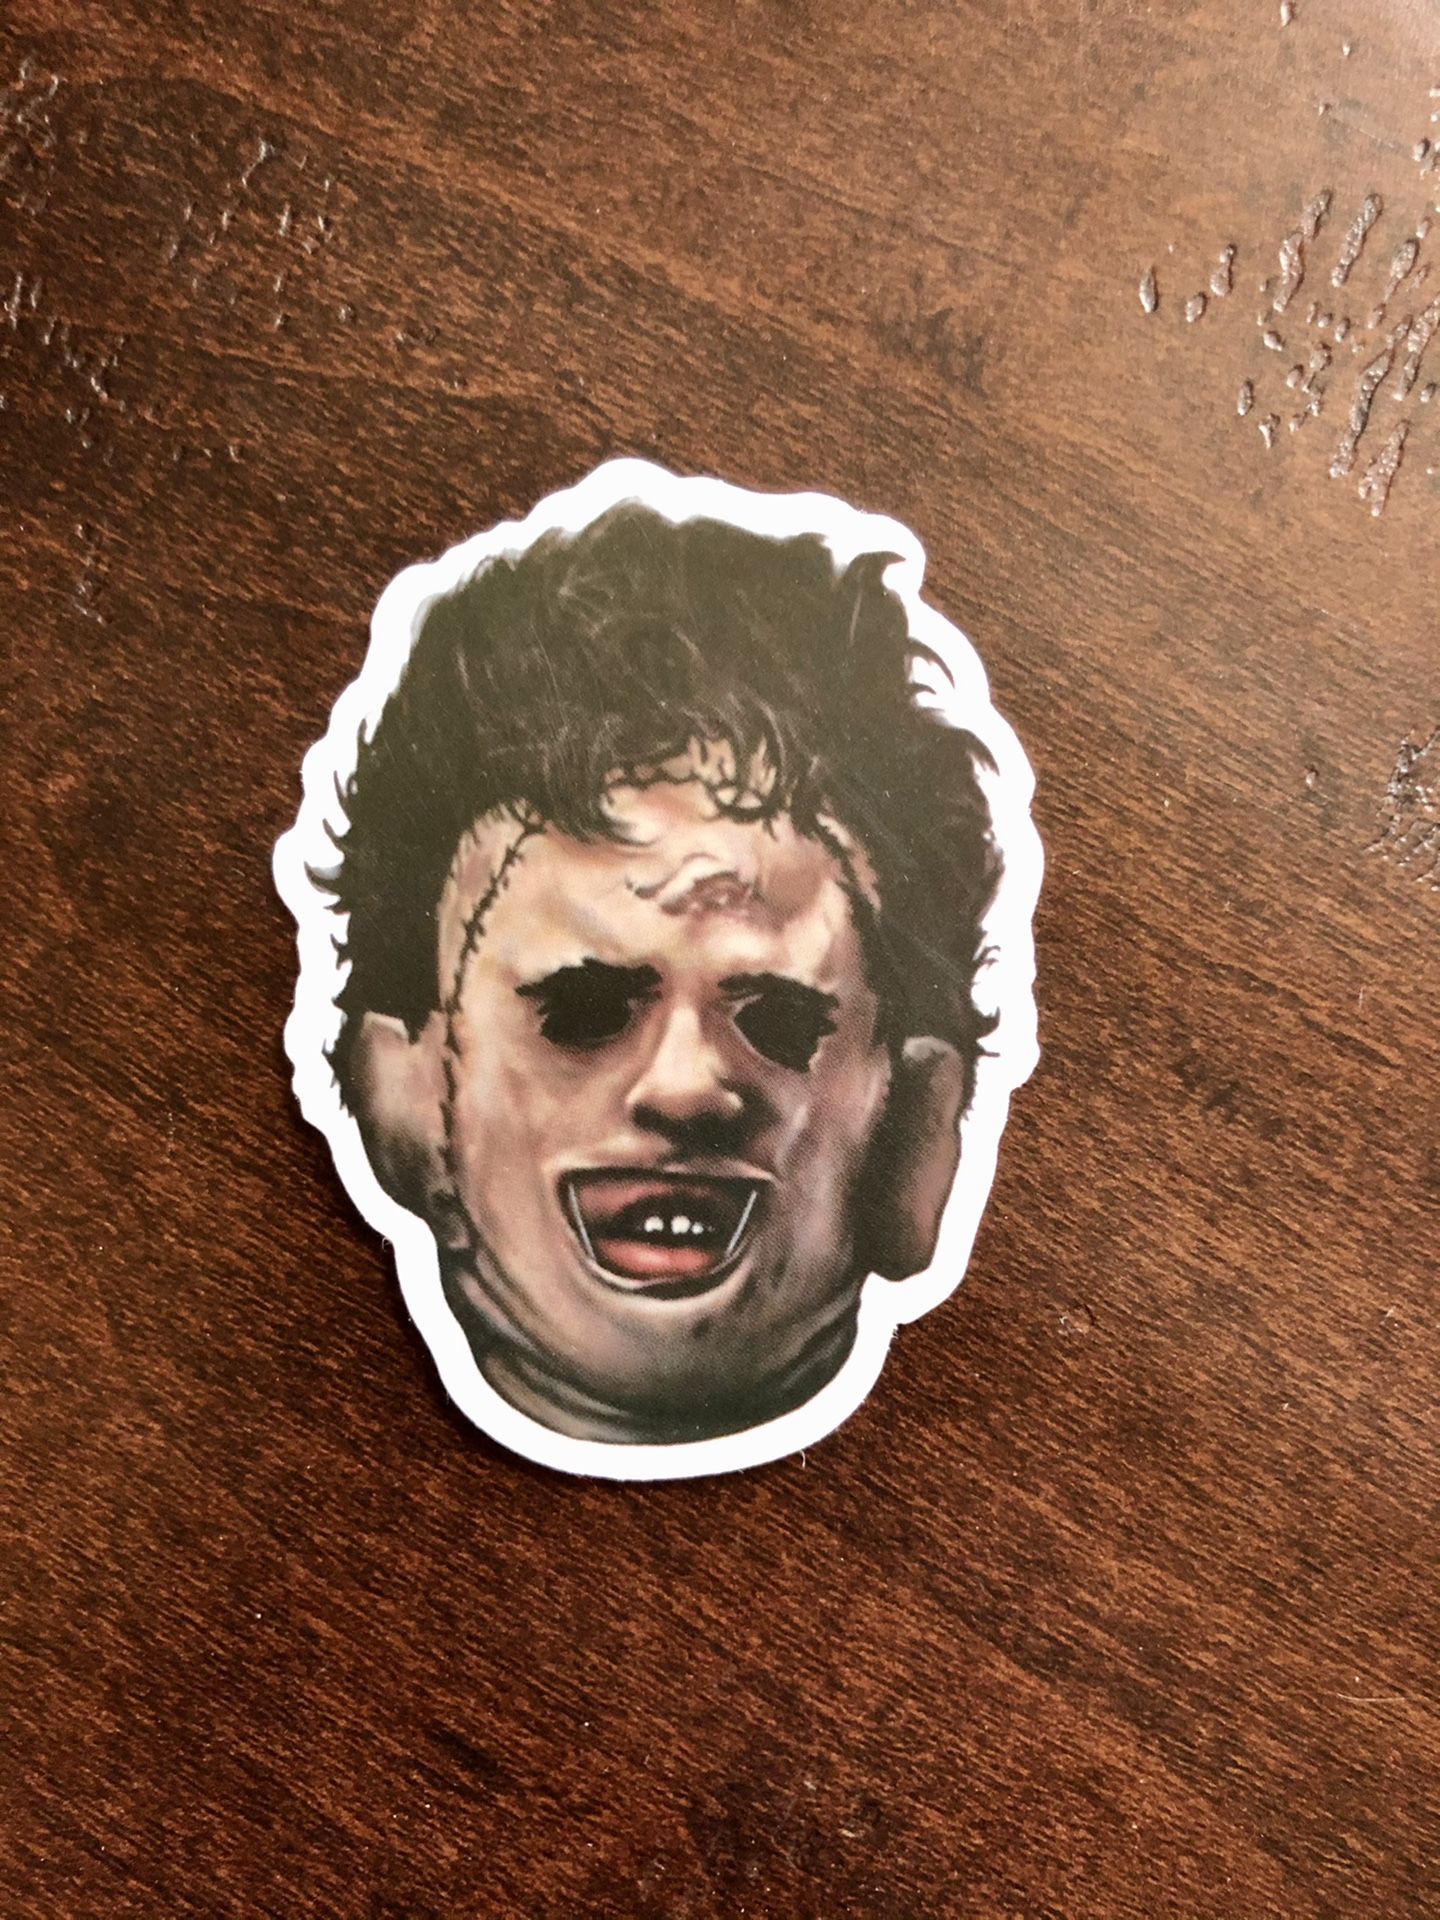 Chainsaw massacre leather face decal sticker. Great for laptops, skateboards, luggage, etc.